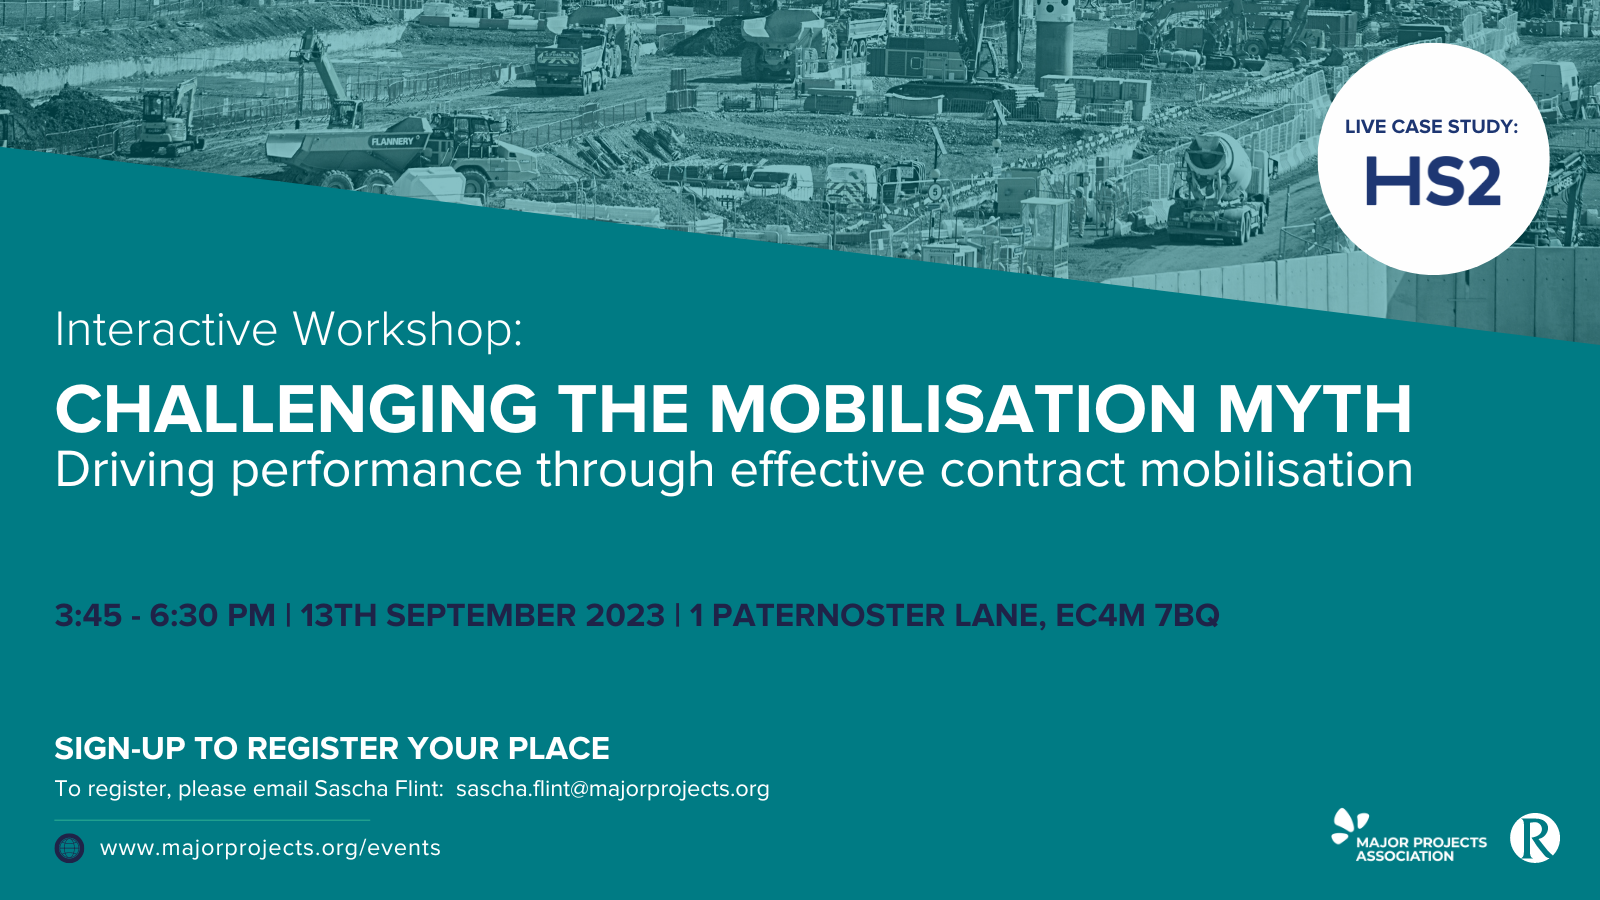 Challenging the mobilisation myth: Driving performance through effective contract mobilisation